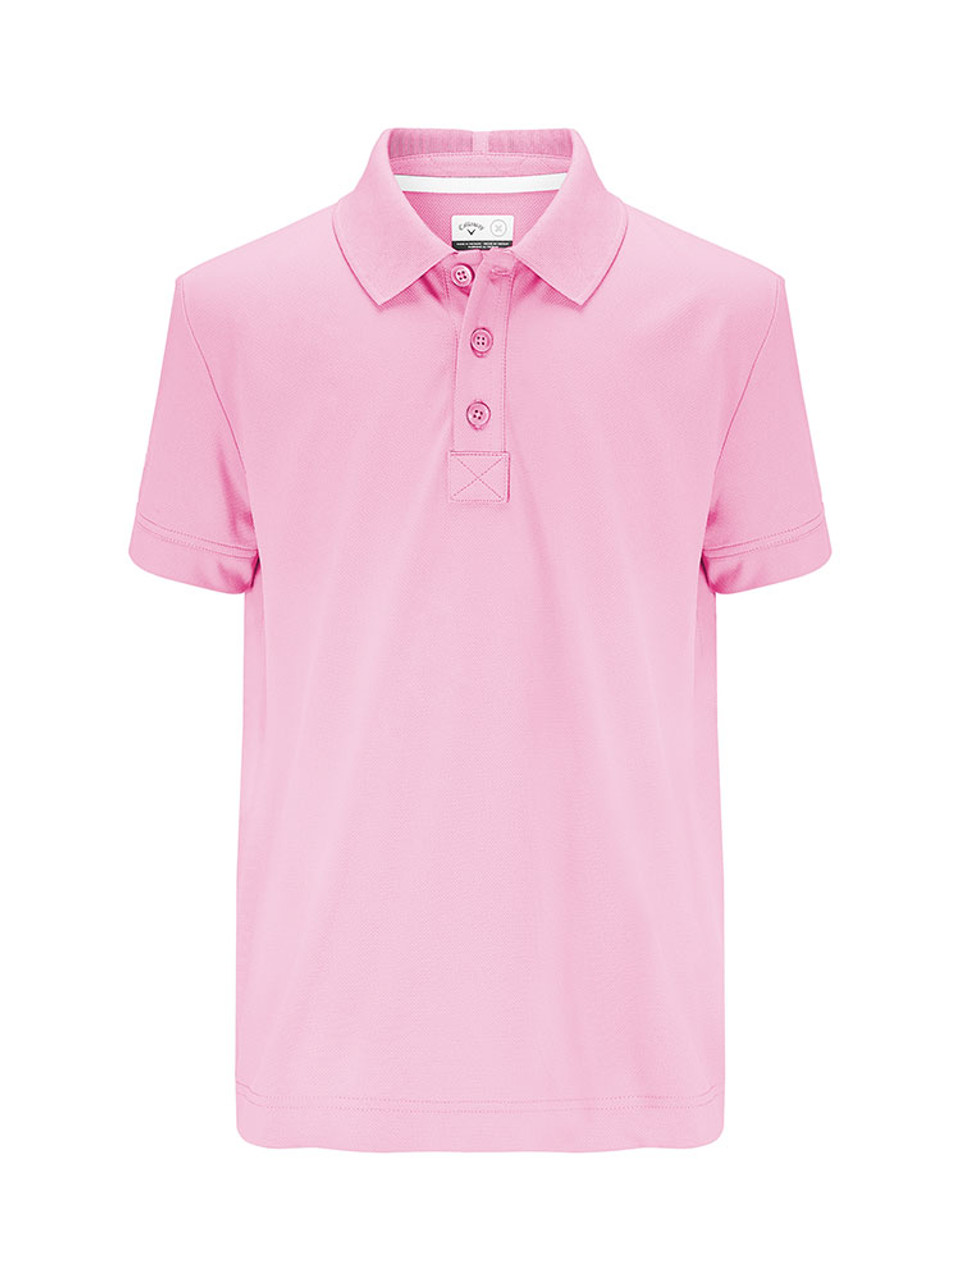 Callaway Youth Boys Solid Polo II - Prism Pink - Juniors | GolfBox